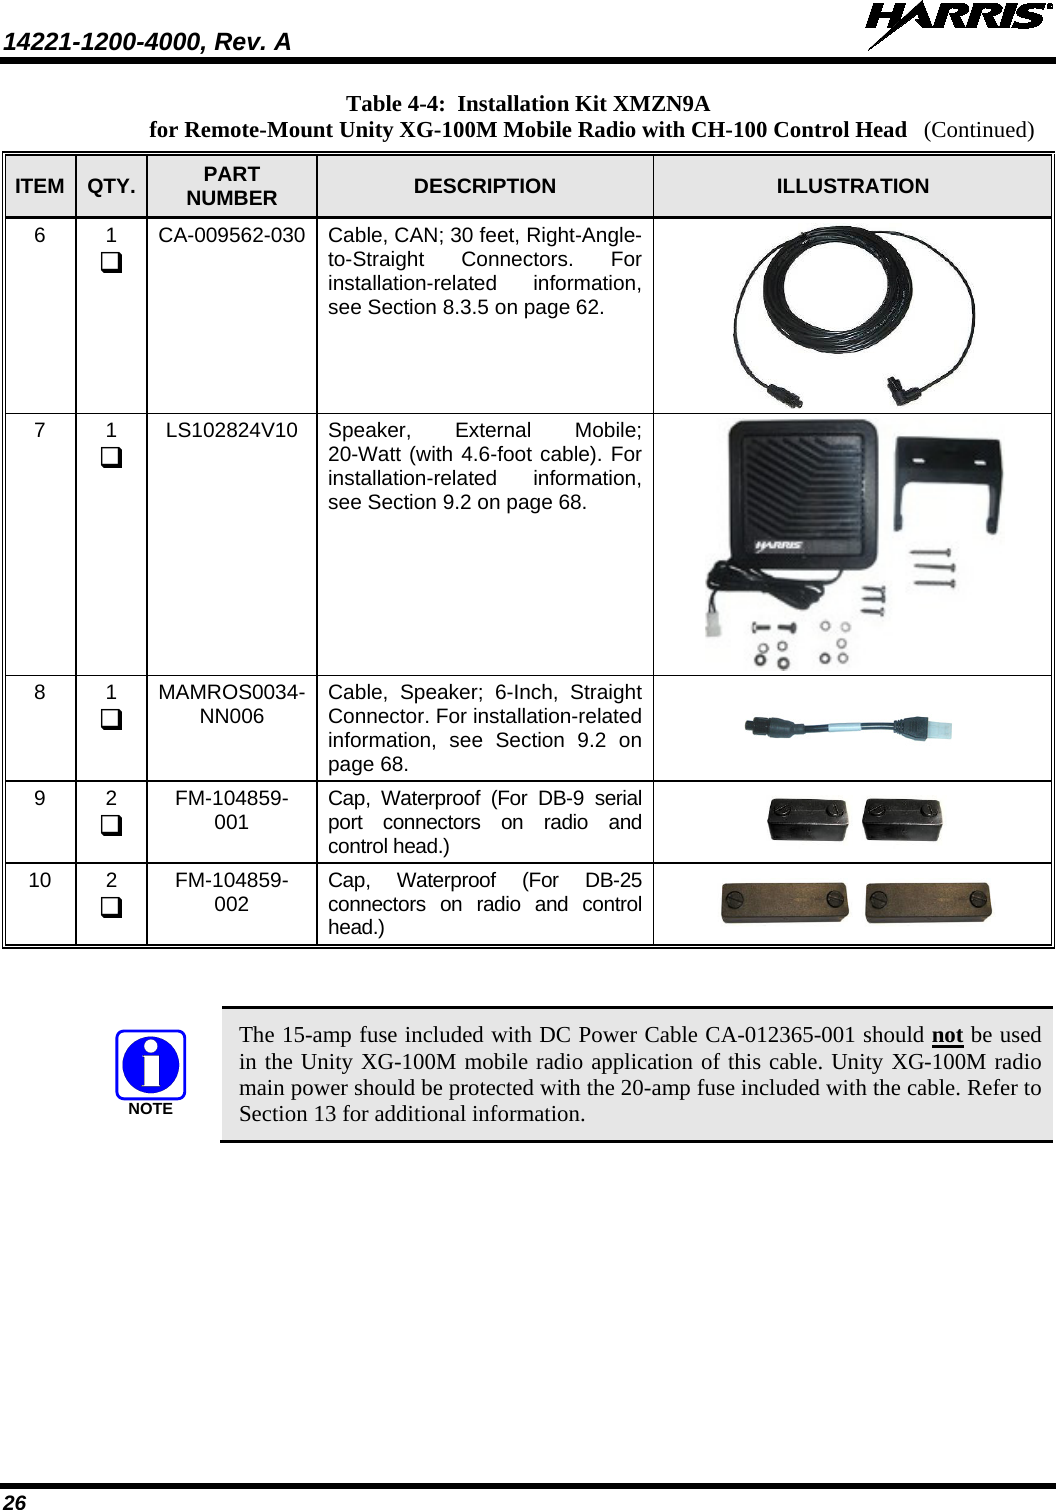 14221-1200-4000, Rev. A    26 Table 4-4:  Installation Kit XMZN9A for Remote-Mount Unity XG-100M Mobile Radio with CH-100 Control Head ITEM QTY. PART NUMBER DESCRIPTION  ILLUSTRATION 6  1  CA-009562-030 Cable, CAN; 30 feet, Right-Angle-to-Straight Connectors. For installation-related information, see Section 8.3.5 on page 62.  7  1  LS102824V10 Speaker, External Mobile; 20-Watt (with 4.6-foot cable). For installation-related information, see Section 9.2 on page 68.  8  1  MAMROS0034-NN006 Cable, Speaker; 6-Inch, Straight Connector. For installation-related information, see Section  9.2 on page 68.   9  2  FM-104859-001 Cap, Waterproof (For DB-9 serial port connectors on radio and control head.)   10 2  FM-104859-002 Cap, Waterproof (For DB-25 connectors on radio and control head.)        The 15-amp fuse included with DC Power Cable CA-012365-001 should not be used in the Unity XG-100M mobile radio application of this cable. Unity XG-100M radio main power should be protected with the 20-amp fuse included with the cable. Refer to Section 13 for additional information.  NOTE (Continued) 